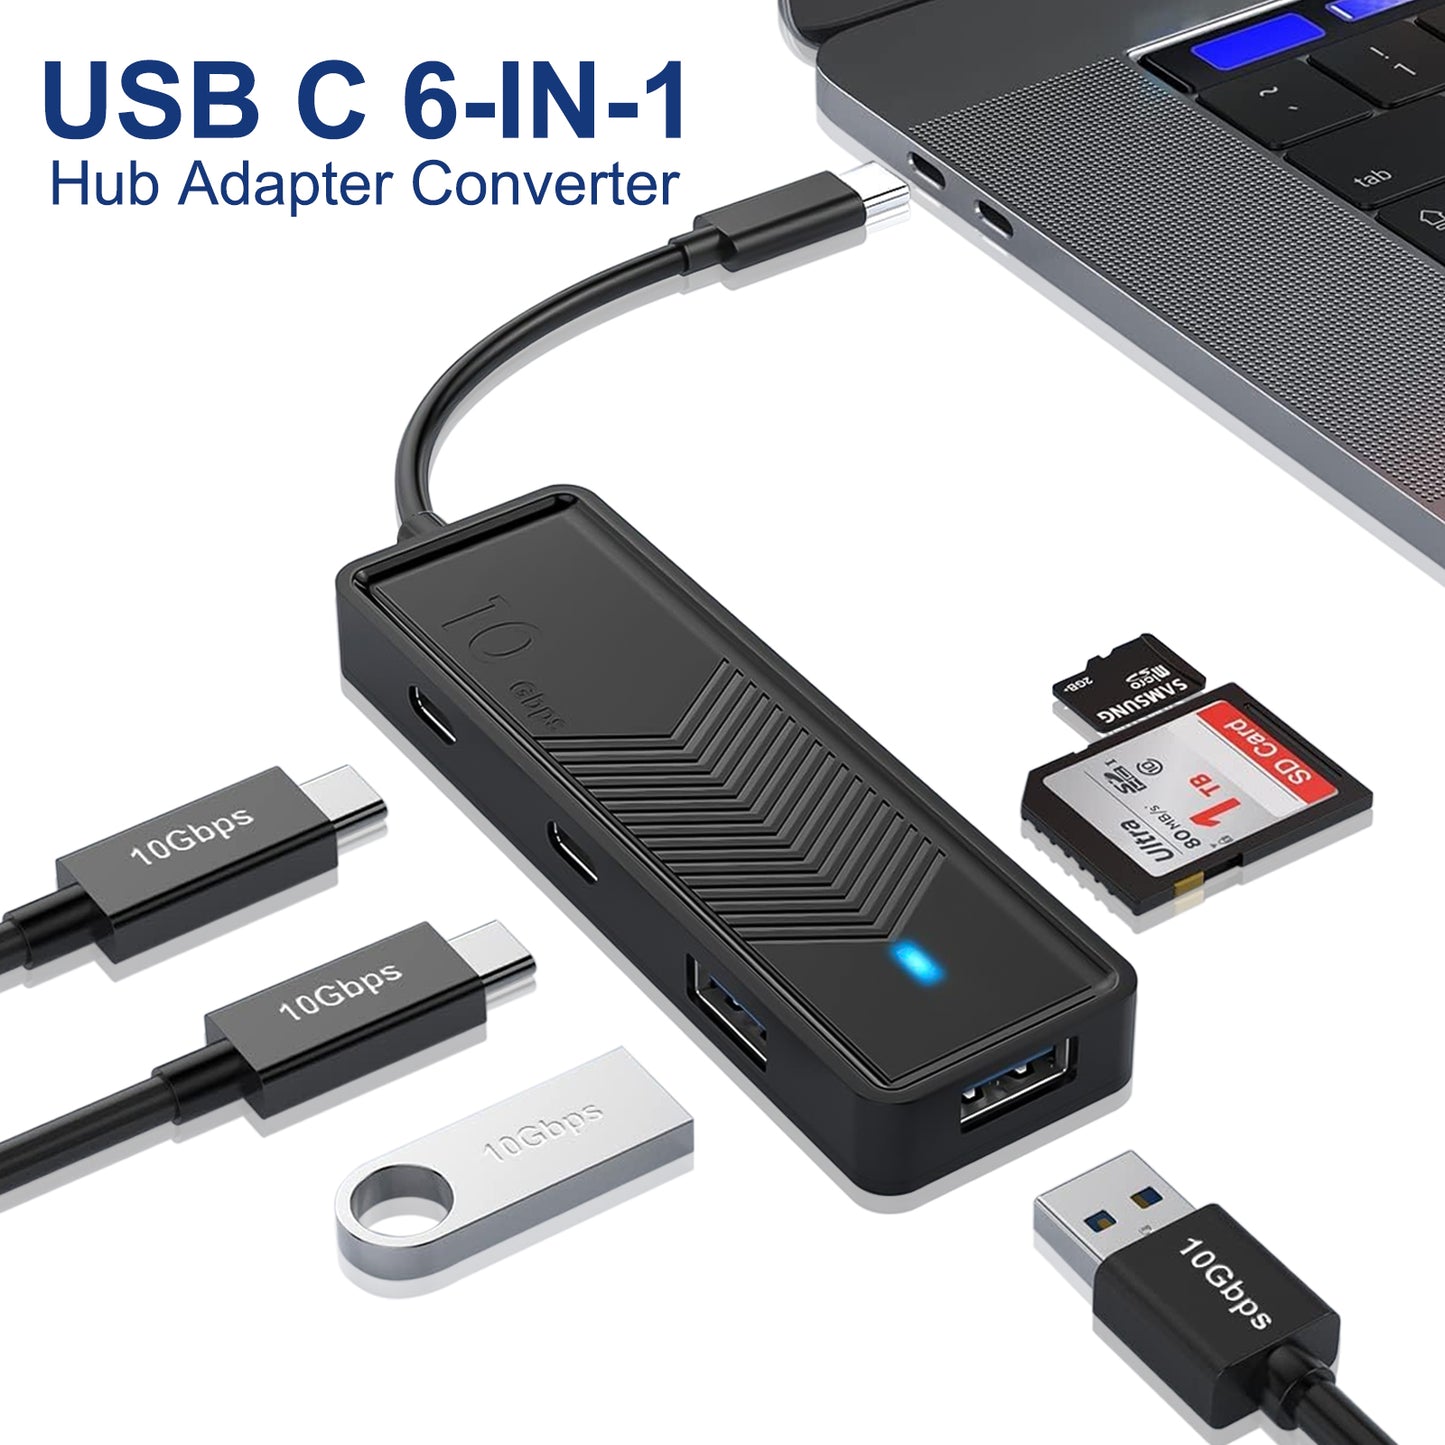 6-IN-1 USB 3.2 Type C Hub Card Reader - 10Gbps Fast Data Transmission SD/TF Card Reader and USB-C Adapter for MacBook Pro, PC, and More (Black)